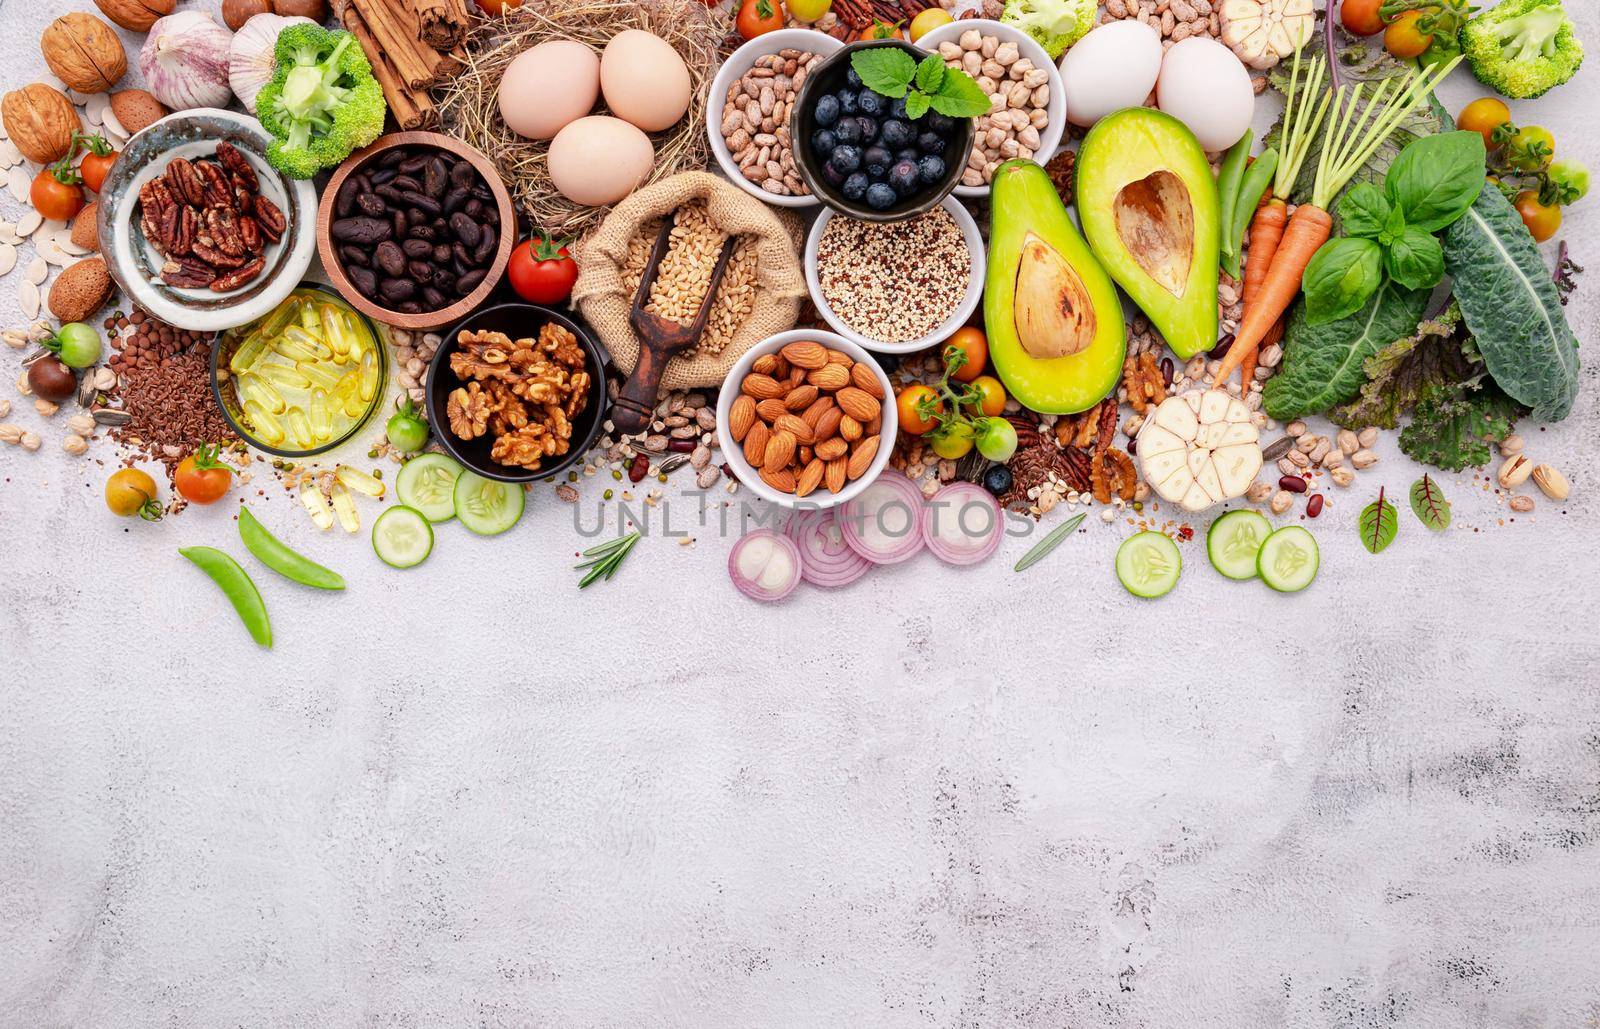 Ingredients for the healthy foods selection. The concept of superfoods set up on white shabby concrete background with copy space.